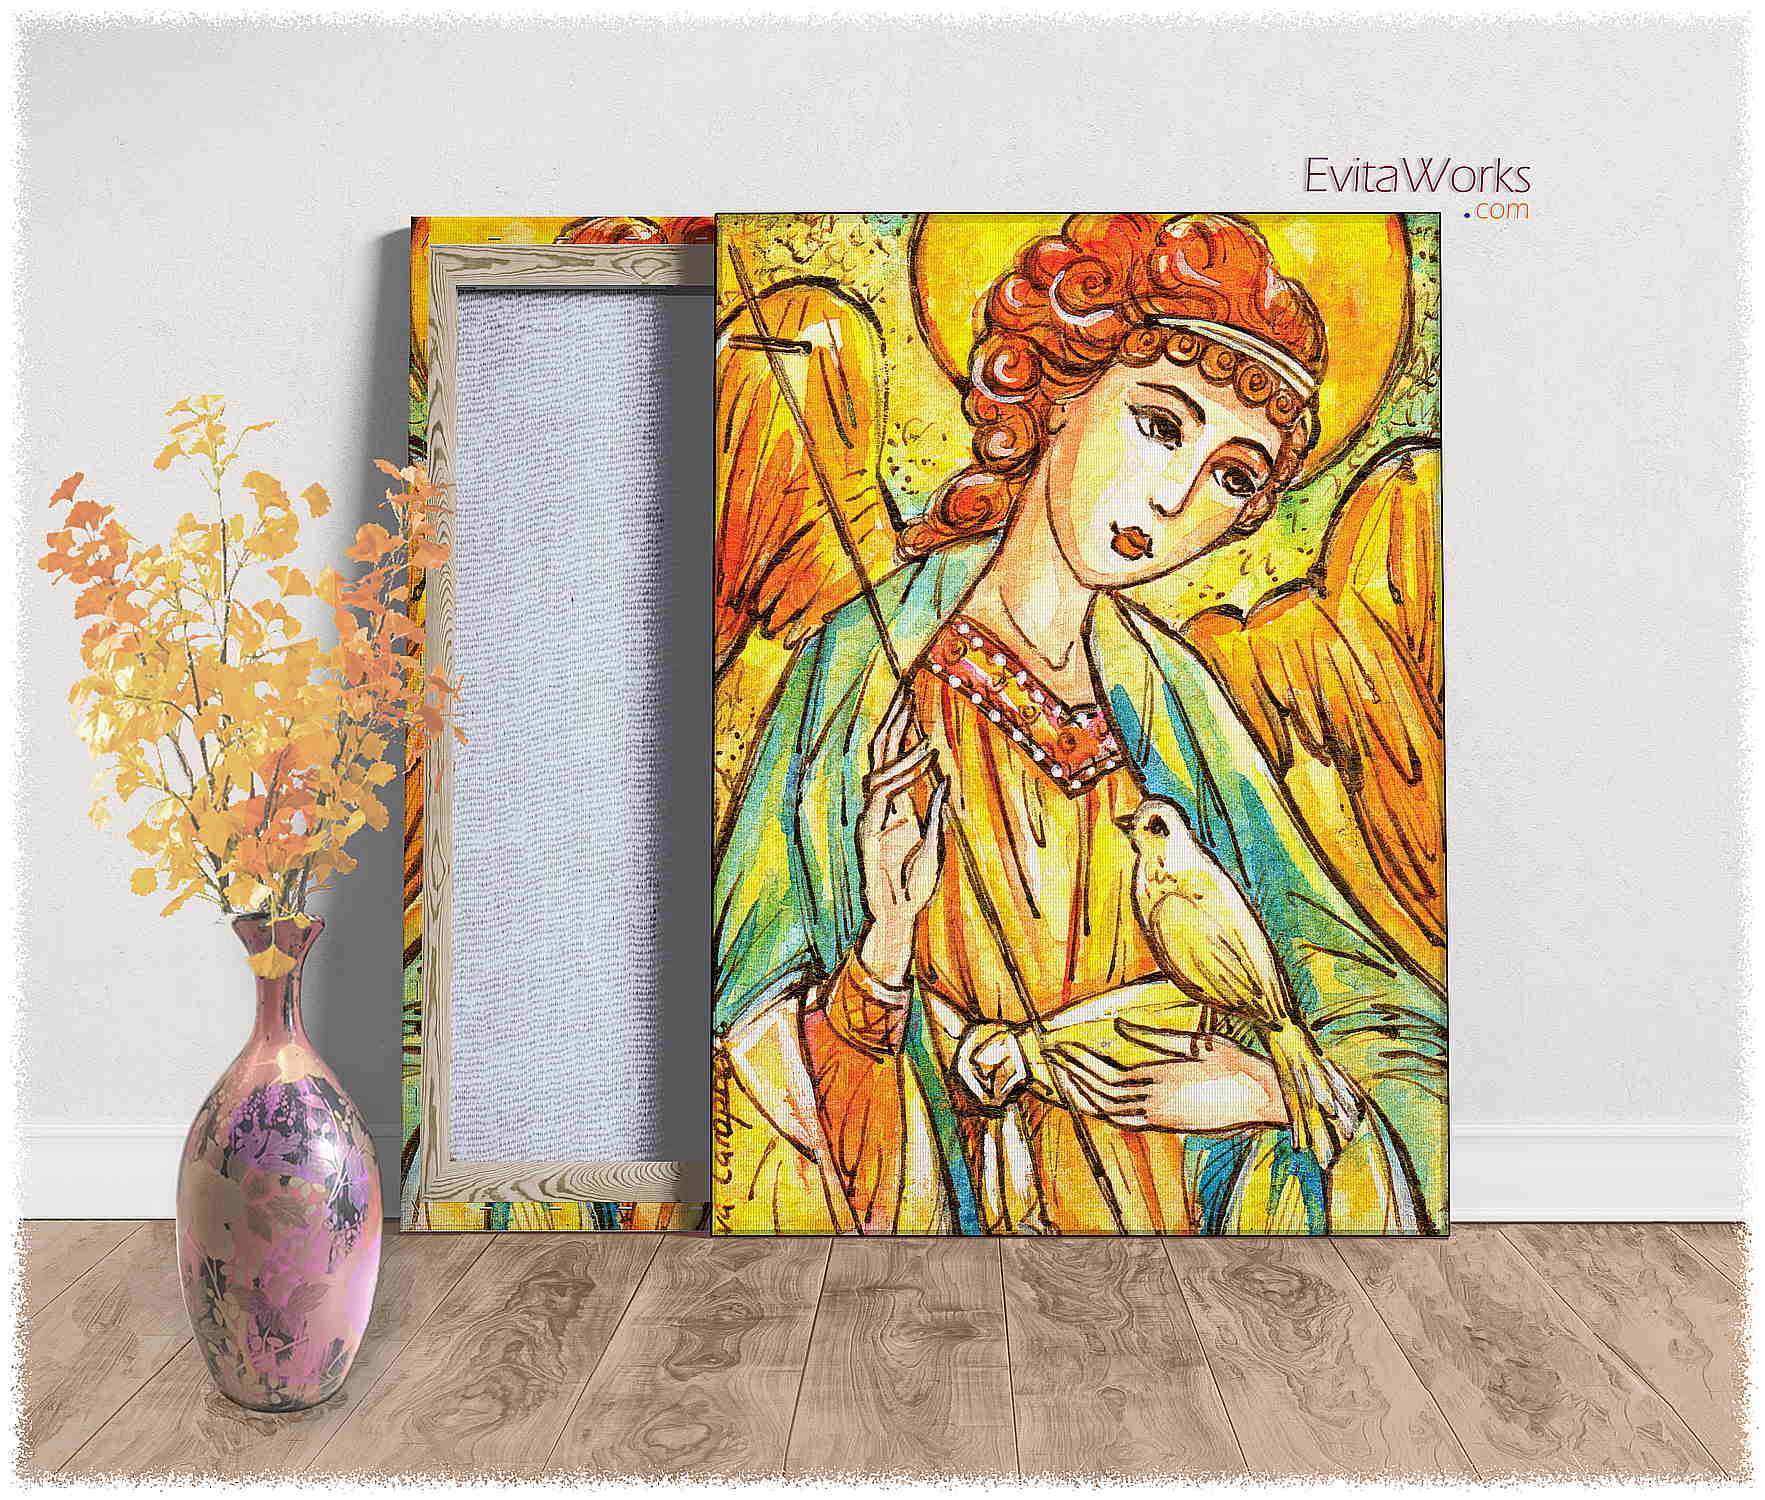 Hit to learn about "Angel 33, Christian art" on canvases